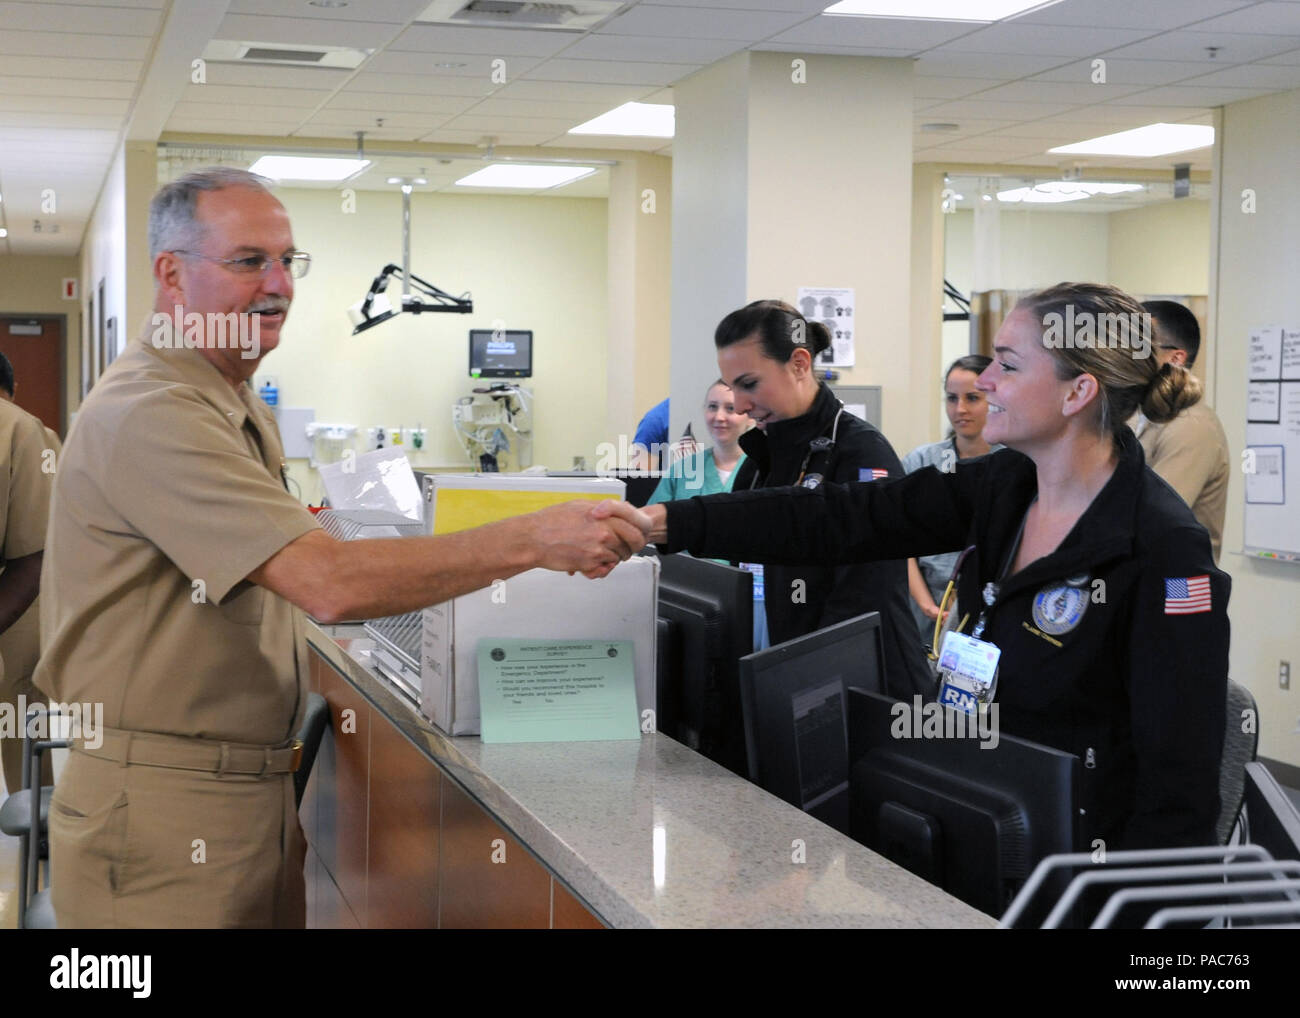 160308-N-UM054-123  MARINE CORPS BASE CAMP PENDLETON, Calif (March 8, 2016)  Rear Adm. Bruce A. Gillingham, Commander, Navy Medicine West, greets Lt. j.g. Micah Kosemund, a registered nurse at Naval Hospital Camp Pendleton, in the Emergency Room during a hospital visit and tour March 8, 2016.  During his visit, Gillingham held an Admiral's call, presented awards and coins to staff members and attended a luncheon with invited civillians and sailors.  The visit was a part of a larger visit aboard Marine Corps Base Camp Pendleton.  (U.S. Navy Photo by Mass Communication Specialist 2nd Class Yasmi Stock Photo